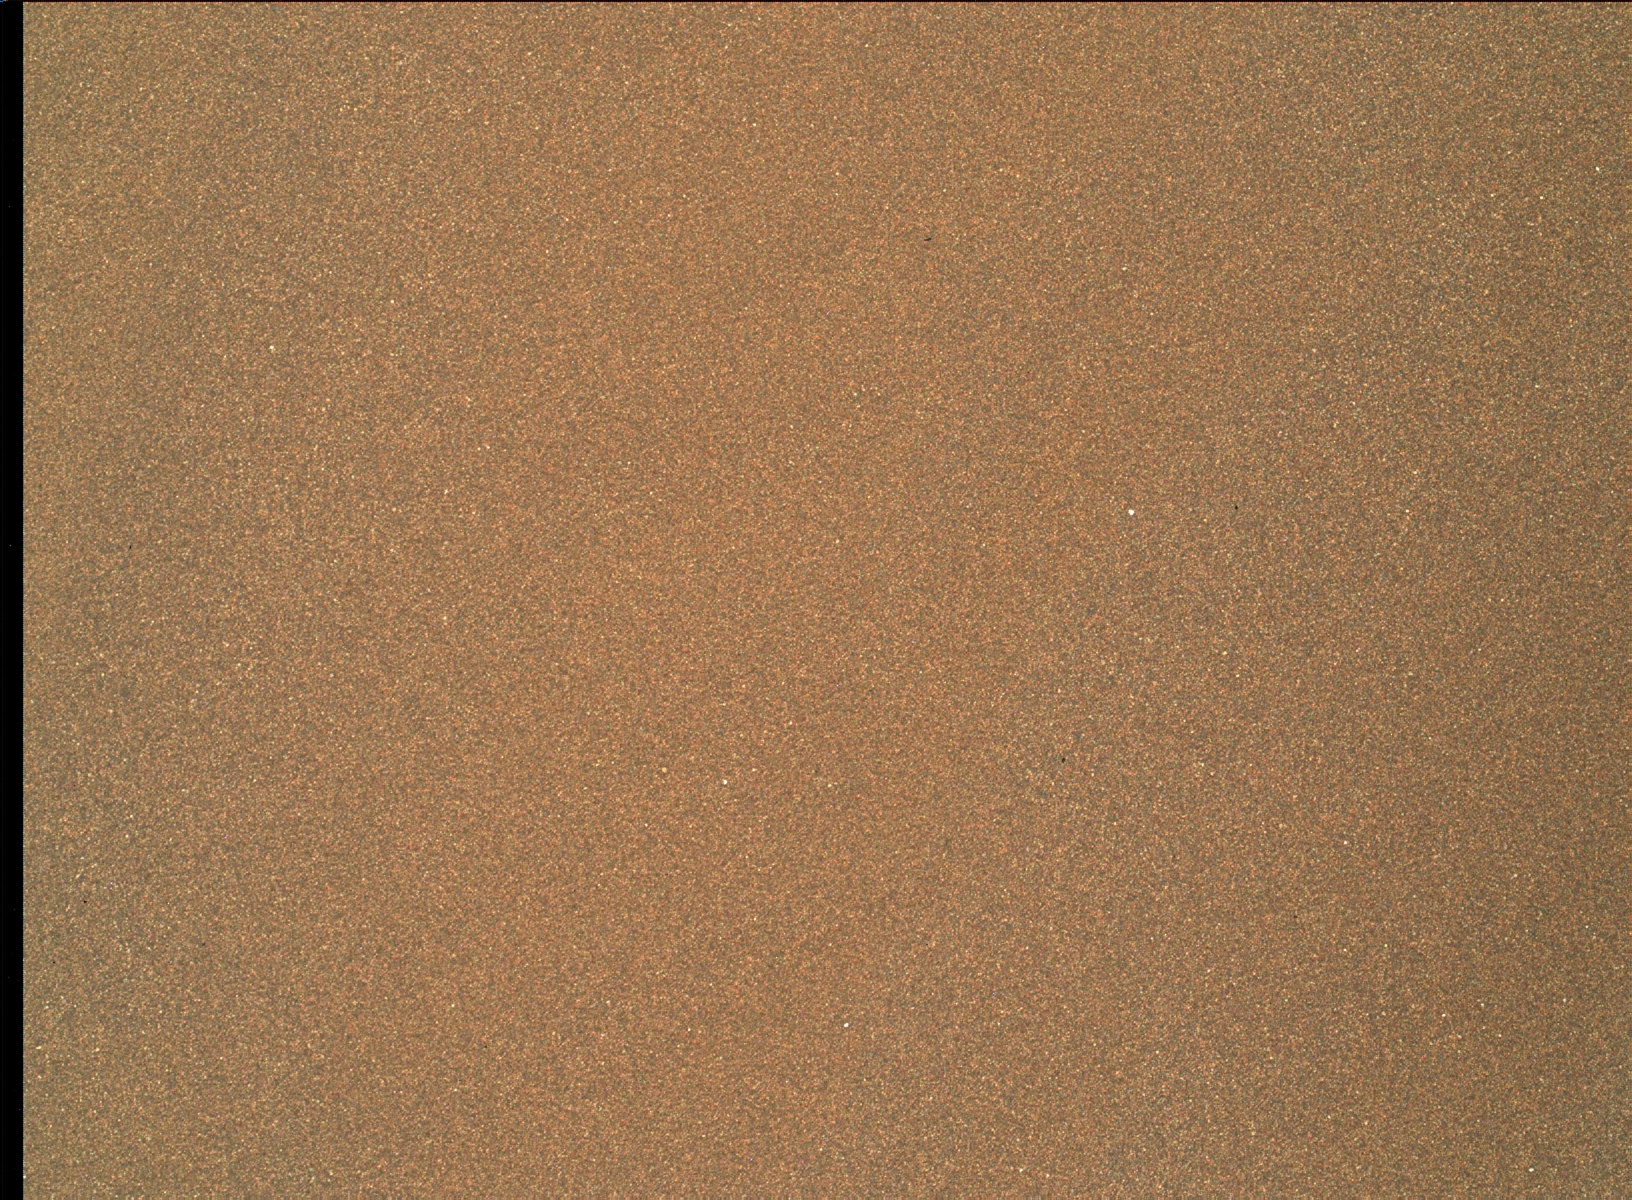 Nasa's Mars rover Curiosity acquired this image using its Mars Hand Lens Imager (MAHLI) on Sol 1650